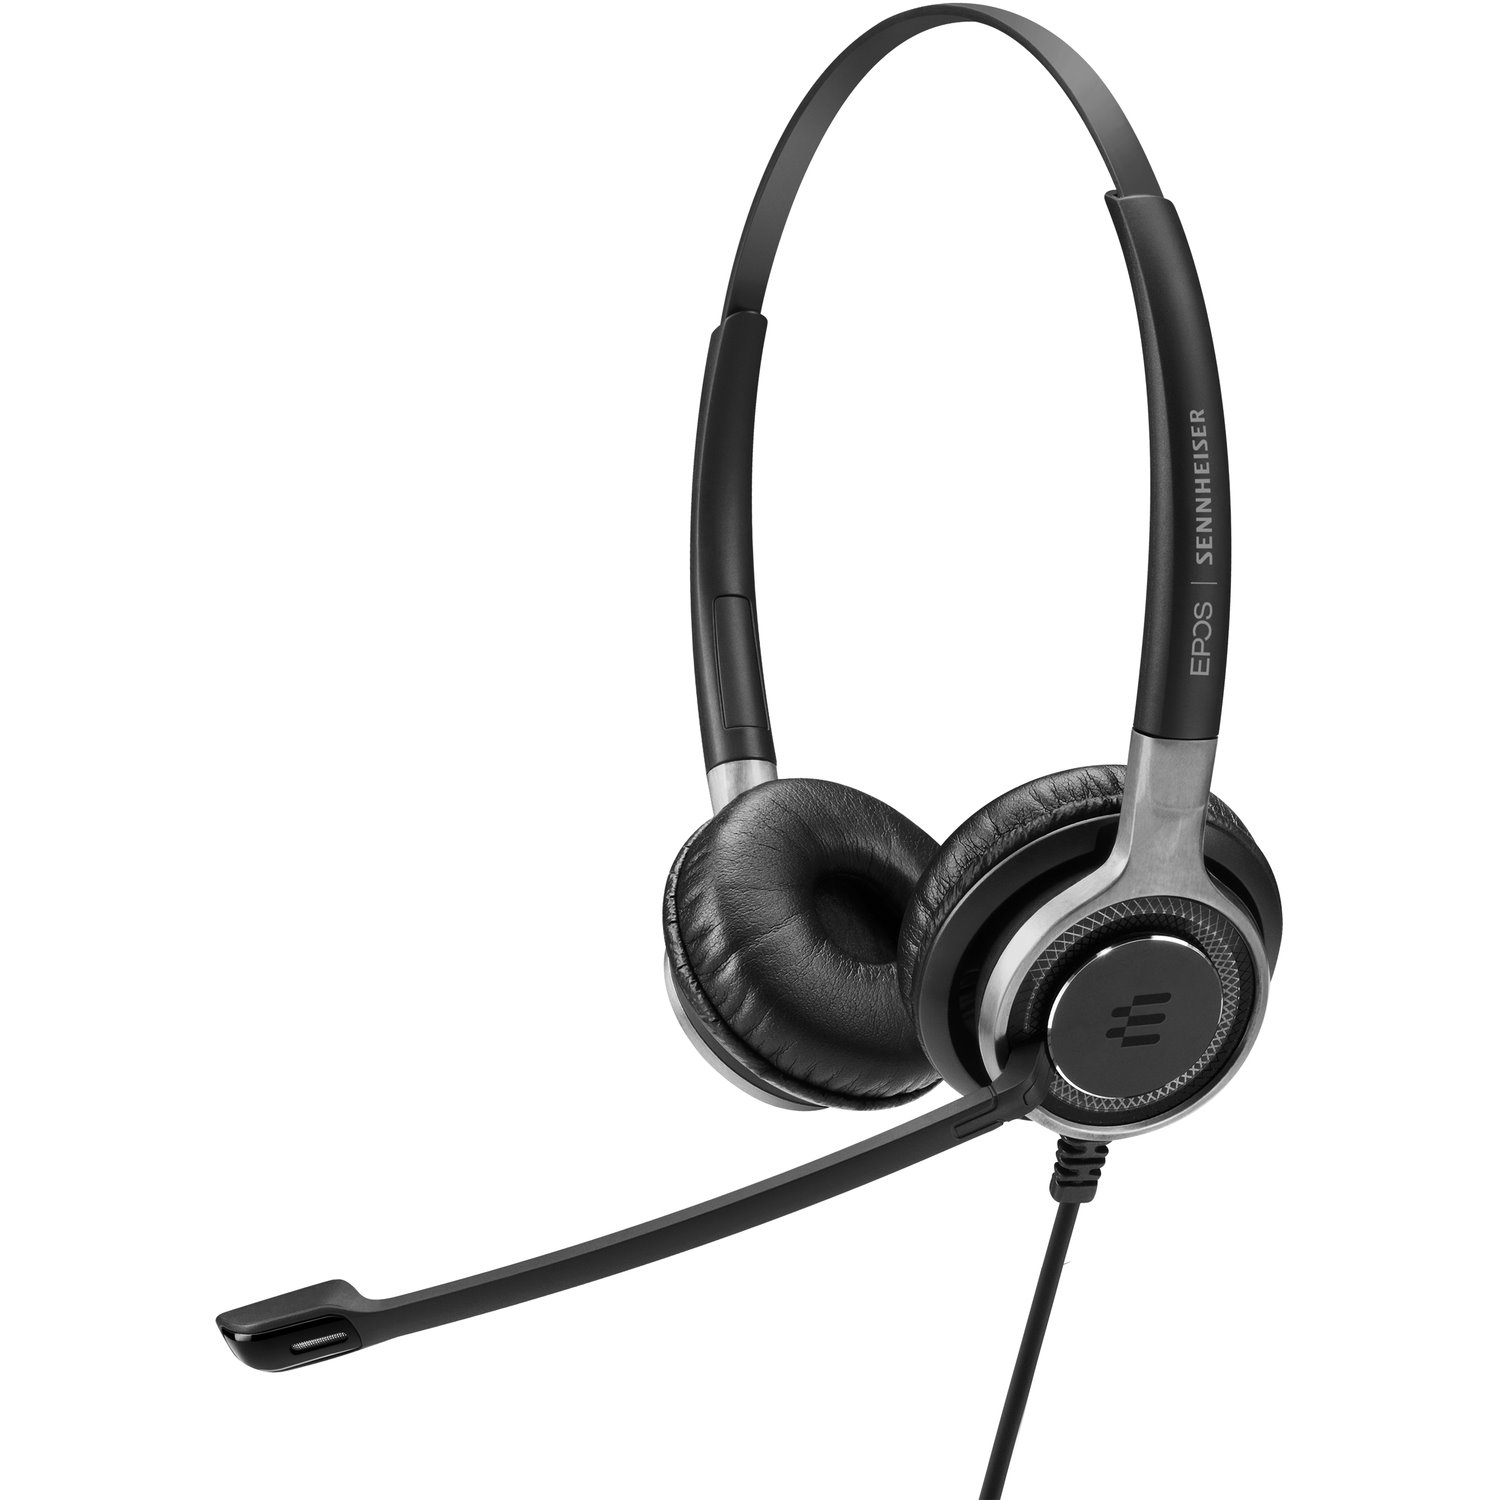 EPOS IMPACT SC 660 Wired On-ear Stereo Headset - Black, Silver